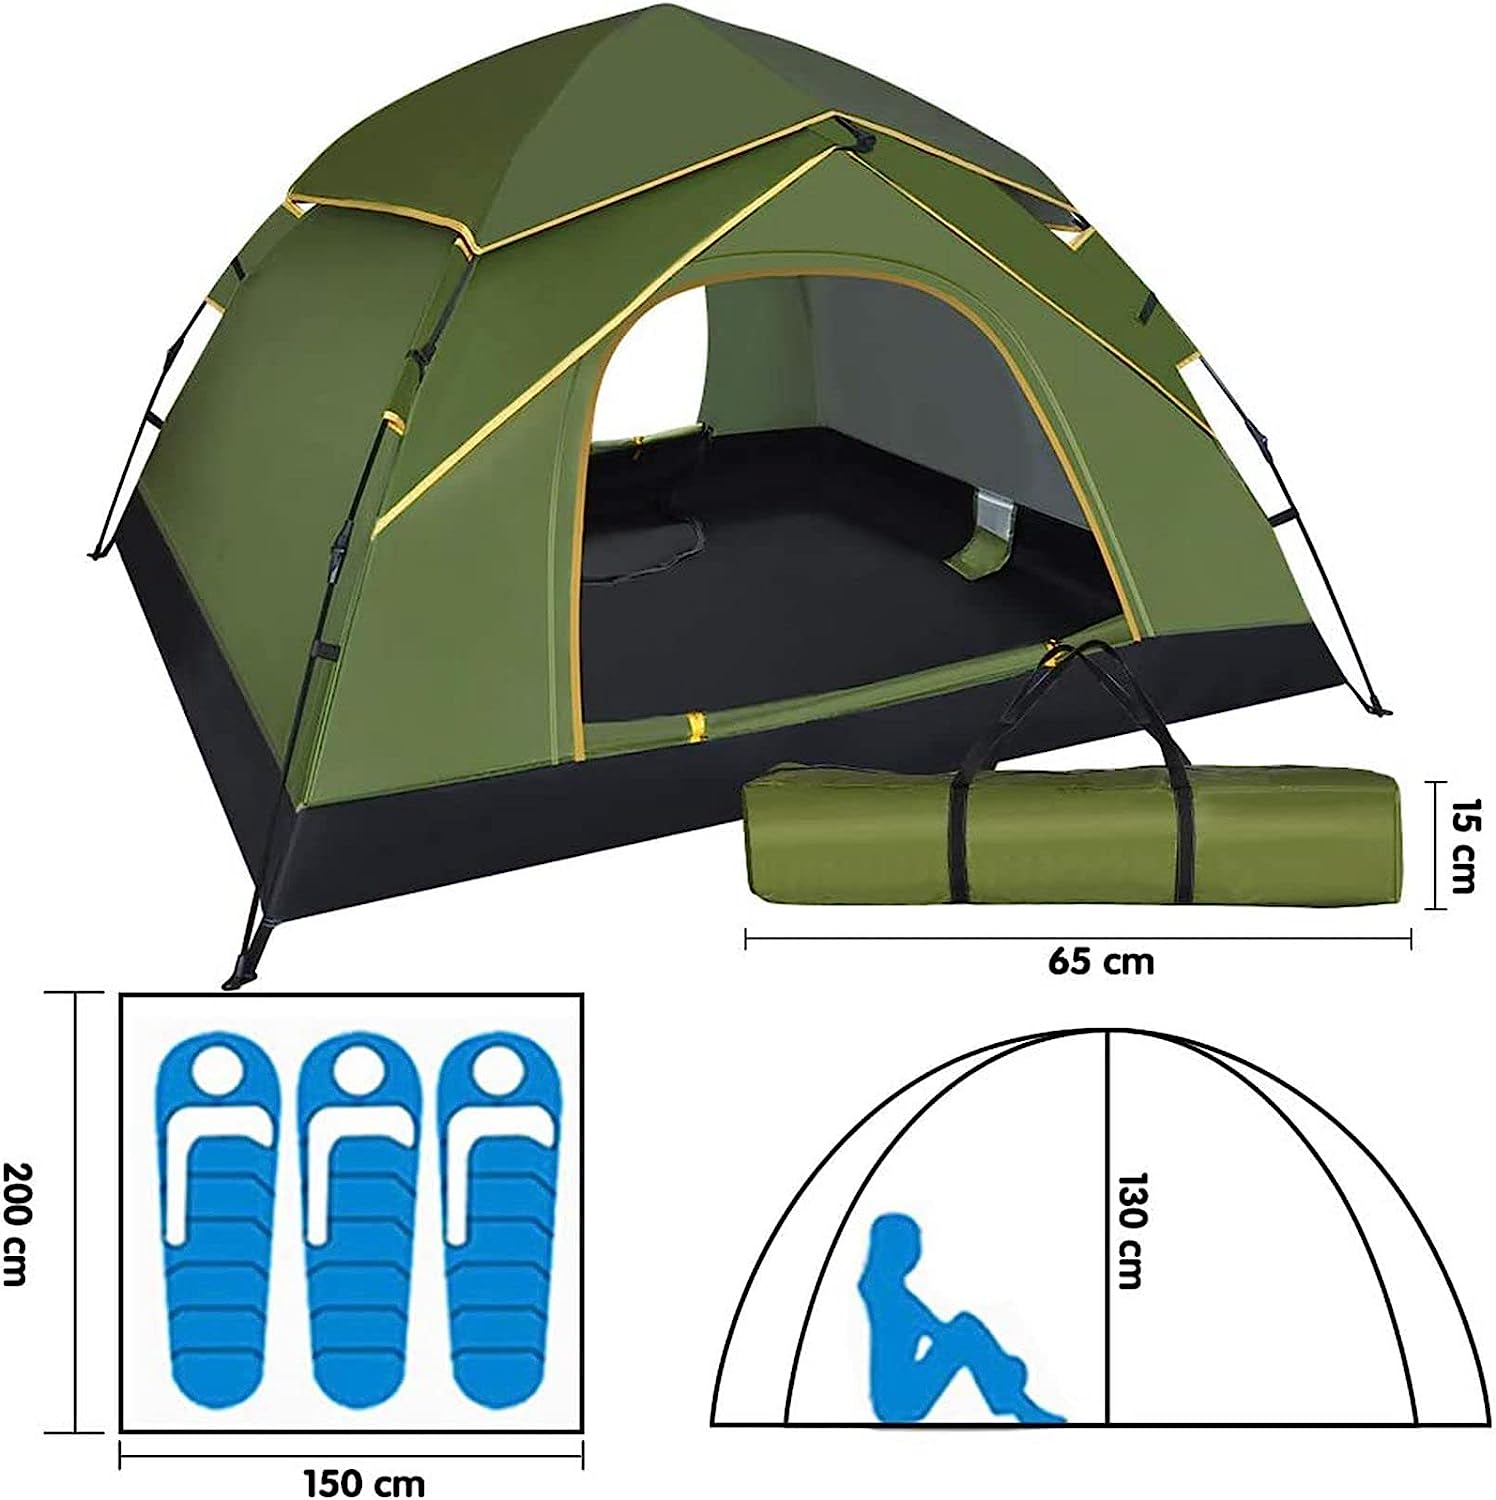 Instant Pop Up Tent, Automatic Portable Beach Dome Tent, Outdoor Waterproof Camping Tent with Carry Bag UV Protection for Family / Garden / Camping / Fishing, 210 x 210 x 135 cm